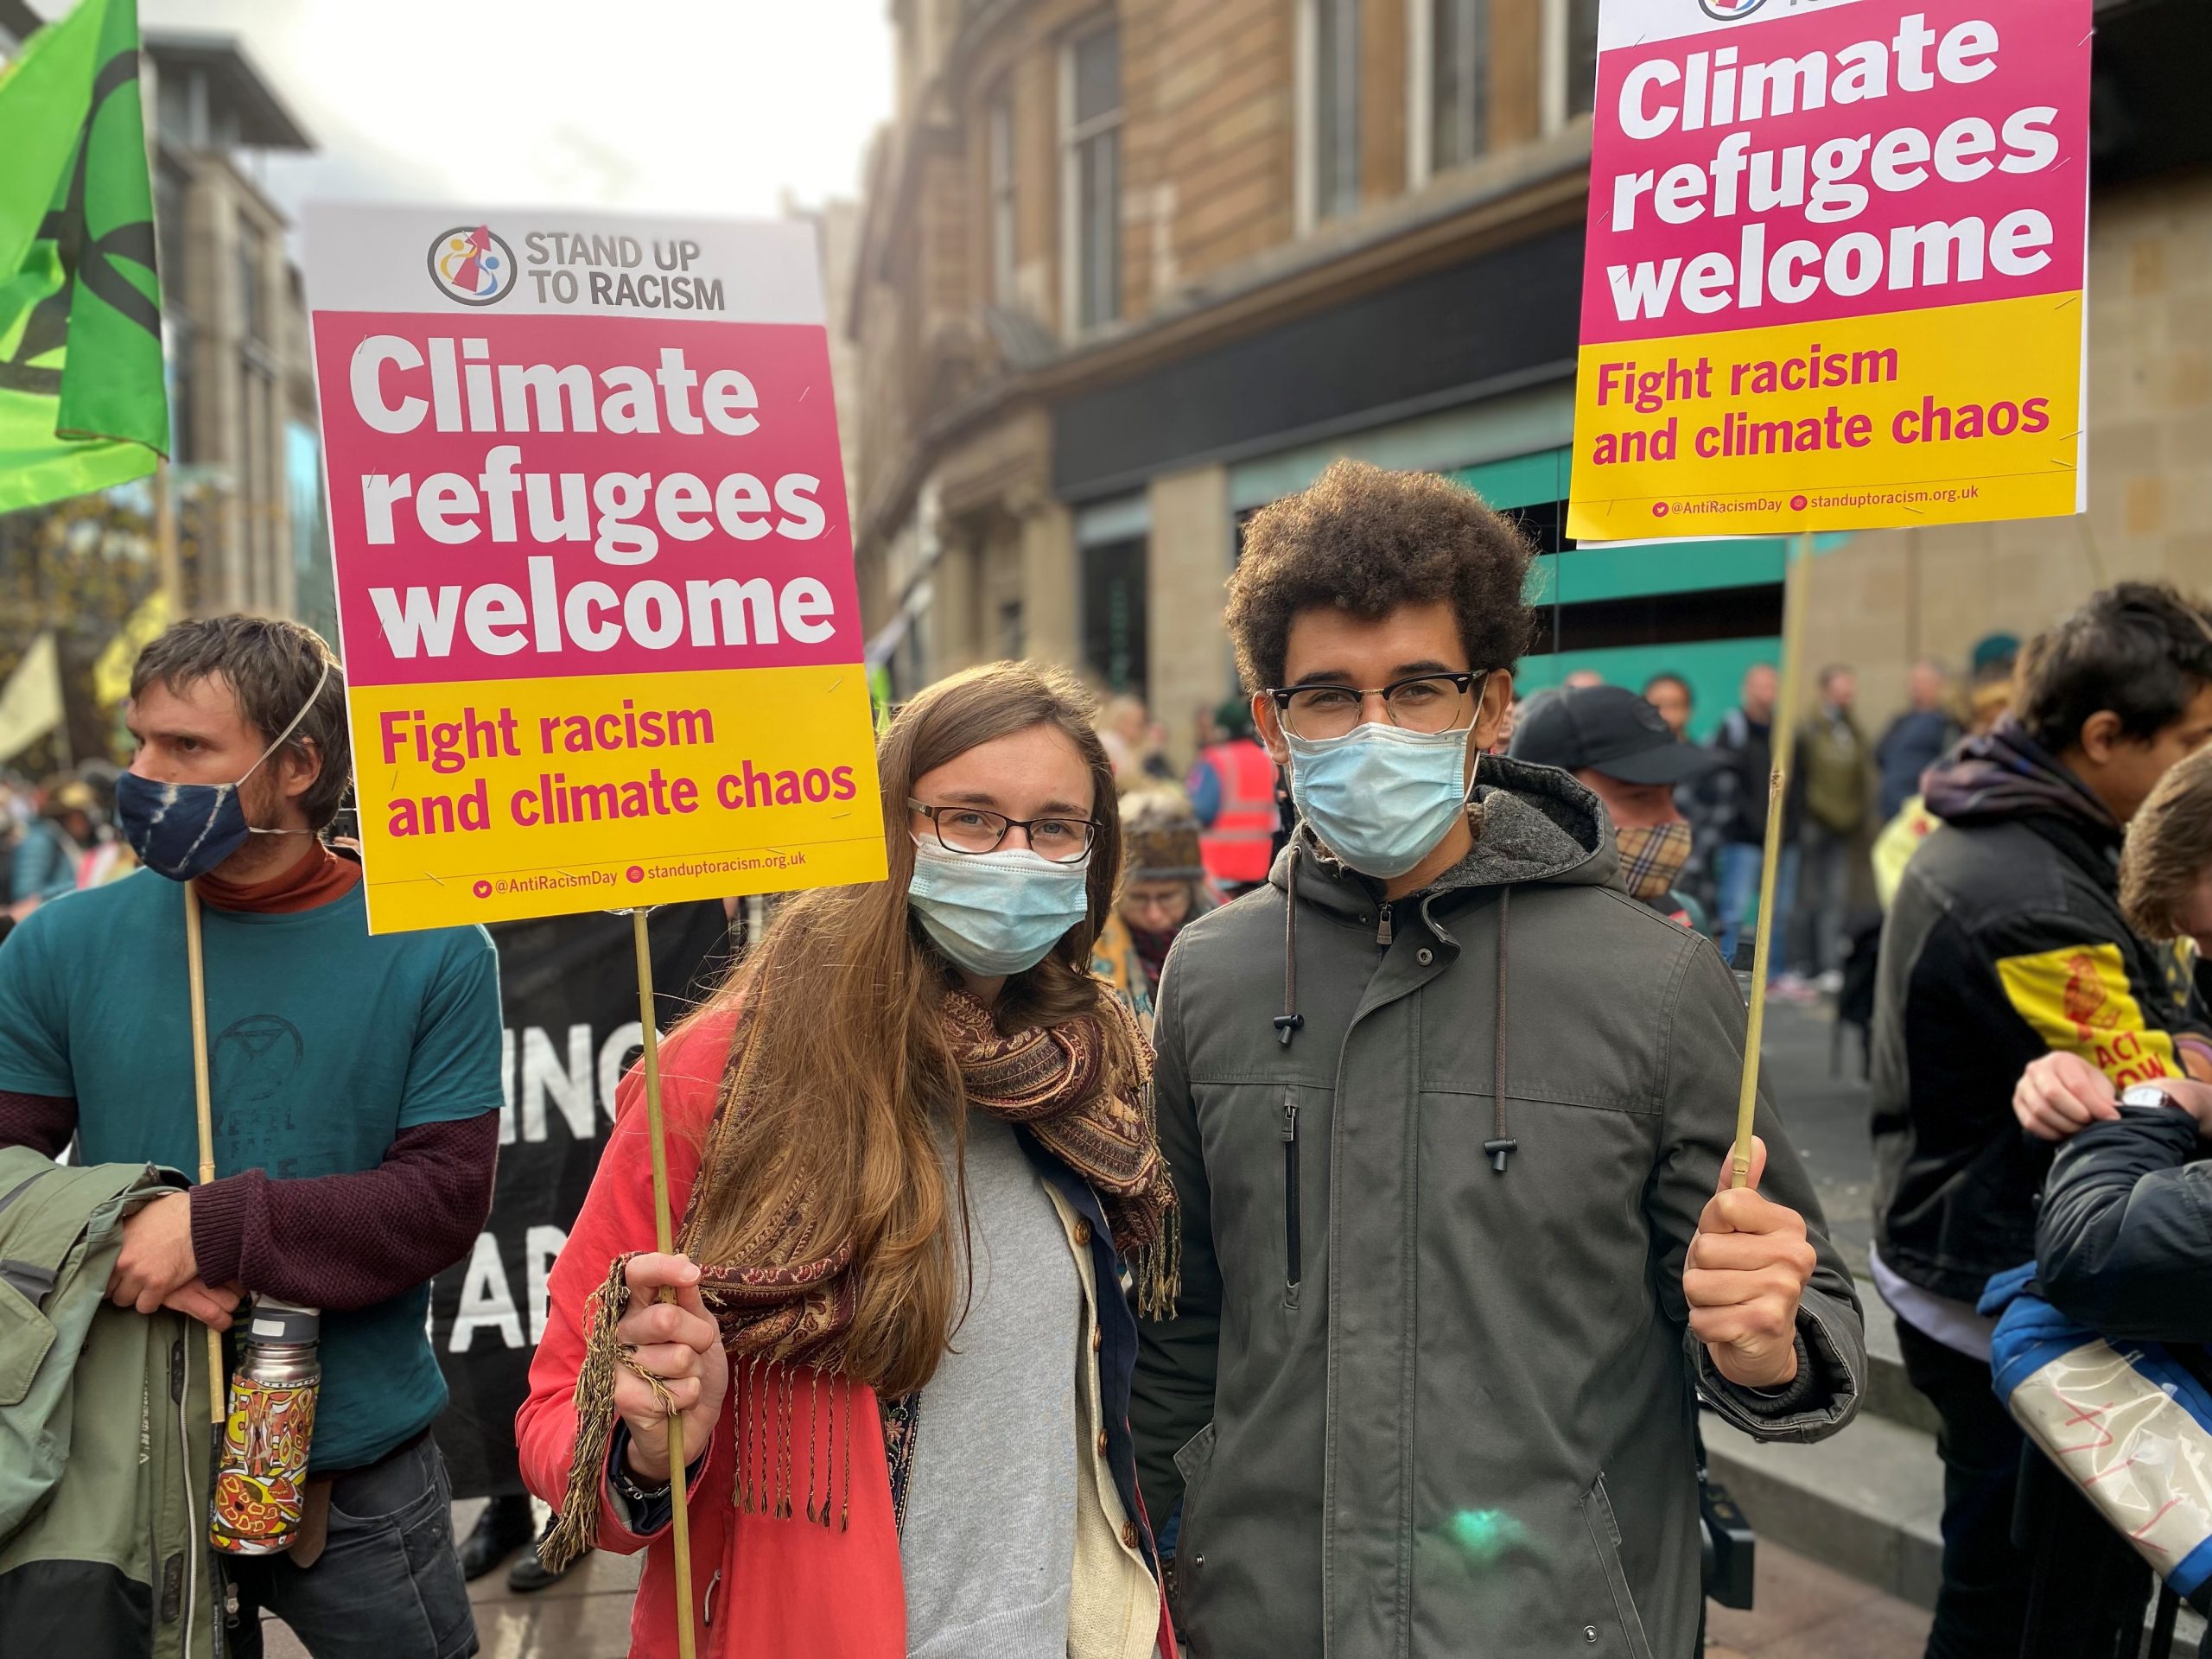 Protestors Joanna and Vladimir march together through the streets of Glasgow at the Extinction Rebellion anti-greenwashing demo, holding placards aloft which read 'Climate Refugees Welcome' - fight racism and climate chaos